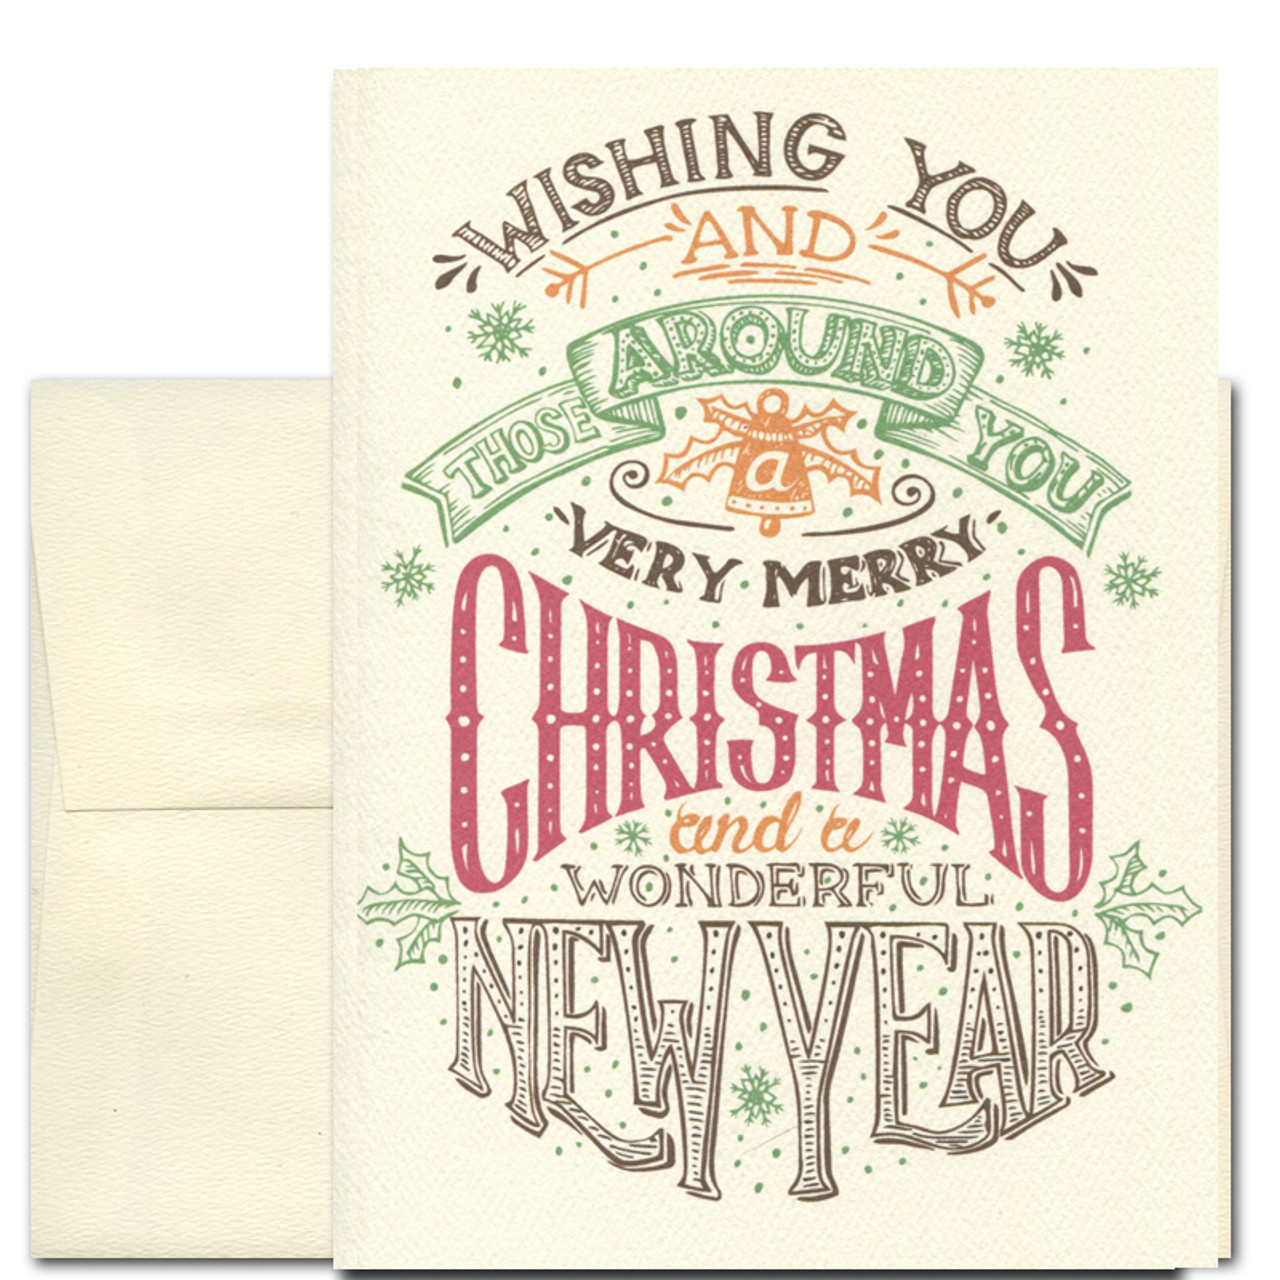 Very Merry Holiday card has a vintage hand-lettered design that reads: Wishing you and those around you a very Merry Christmas and a wonderful New Year